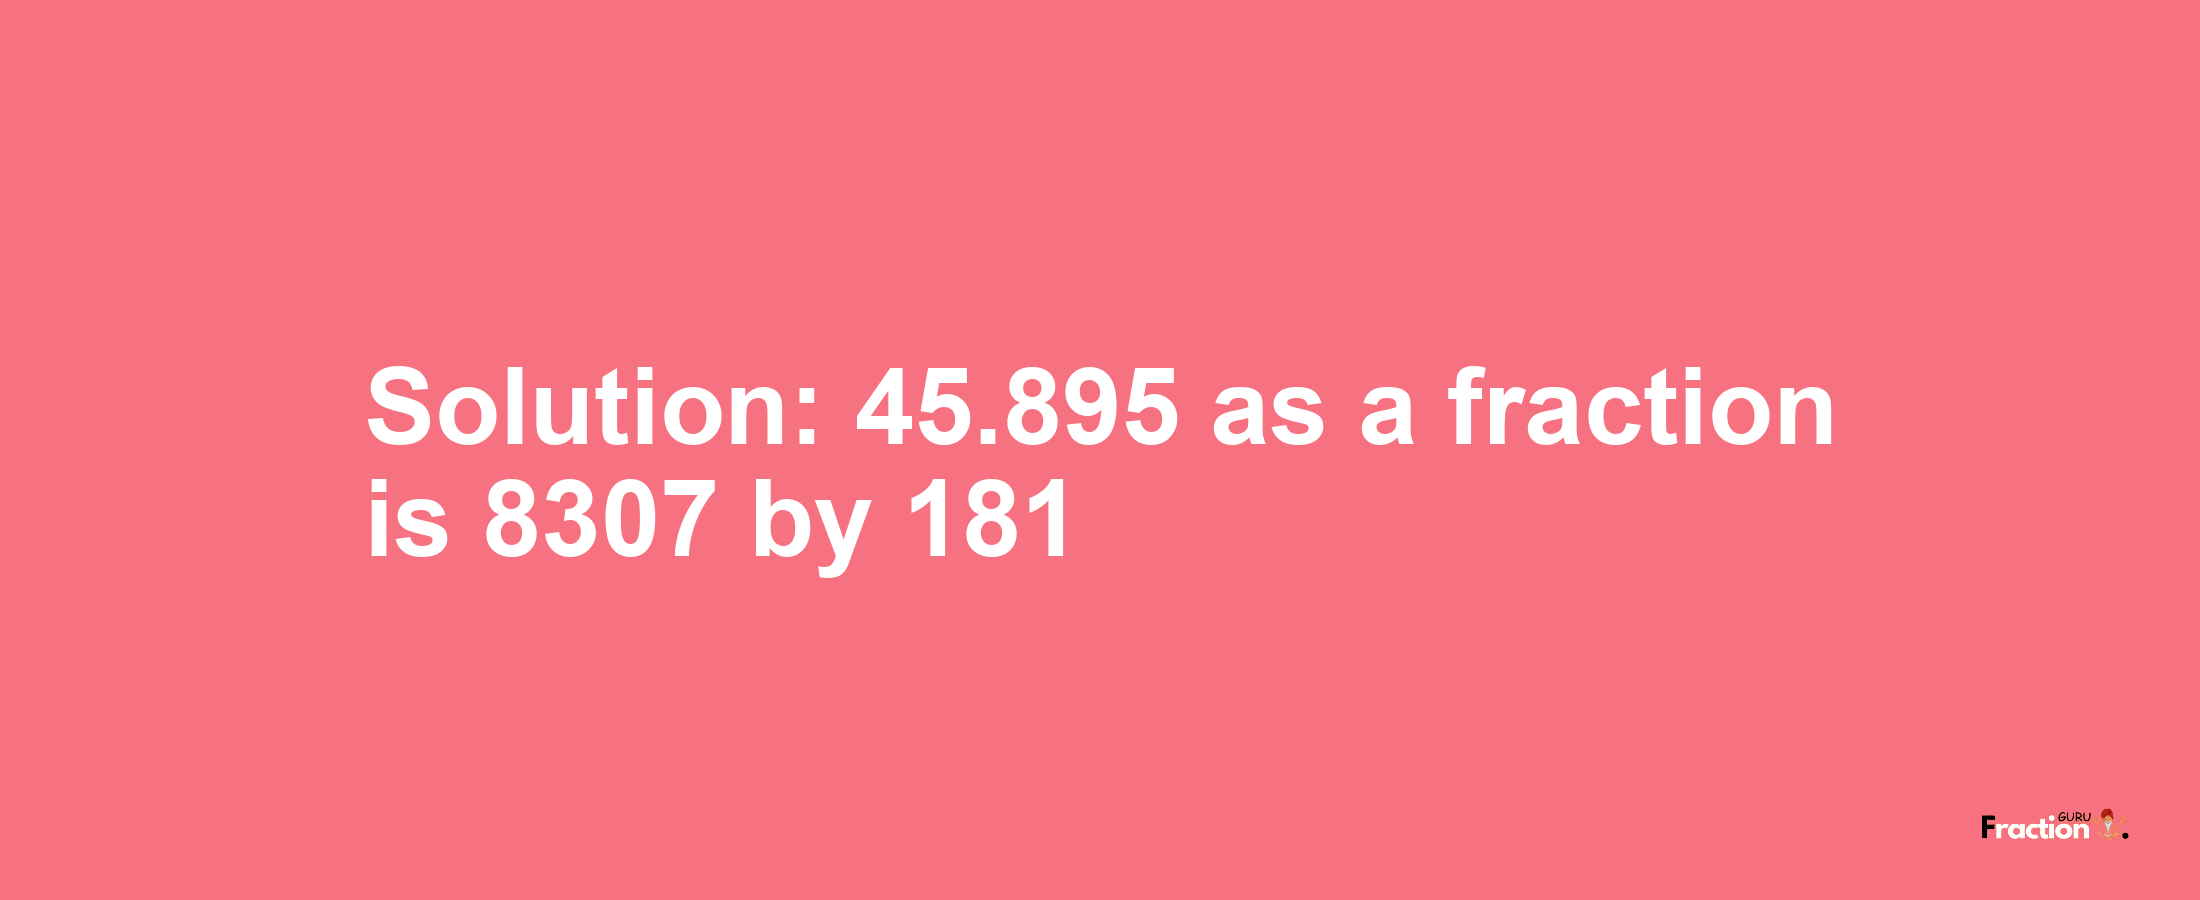 Solution:45.895 as a fraction is 8307/181